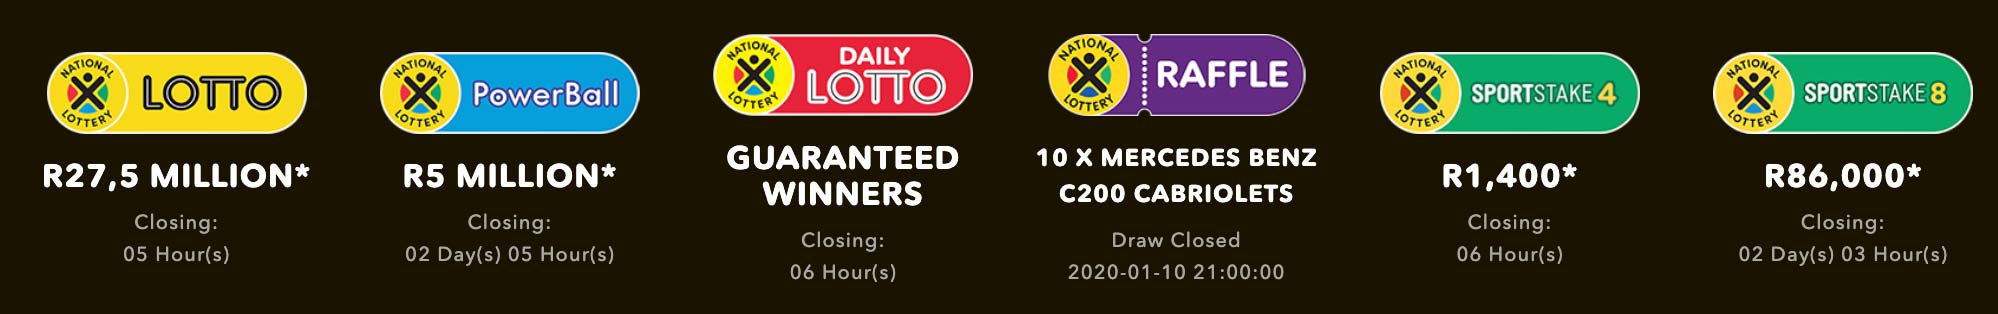 South Africa Lotto Options